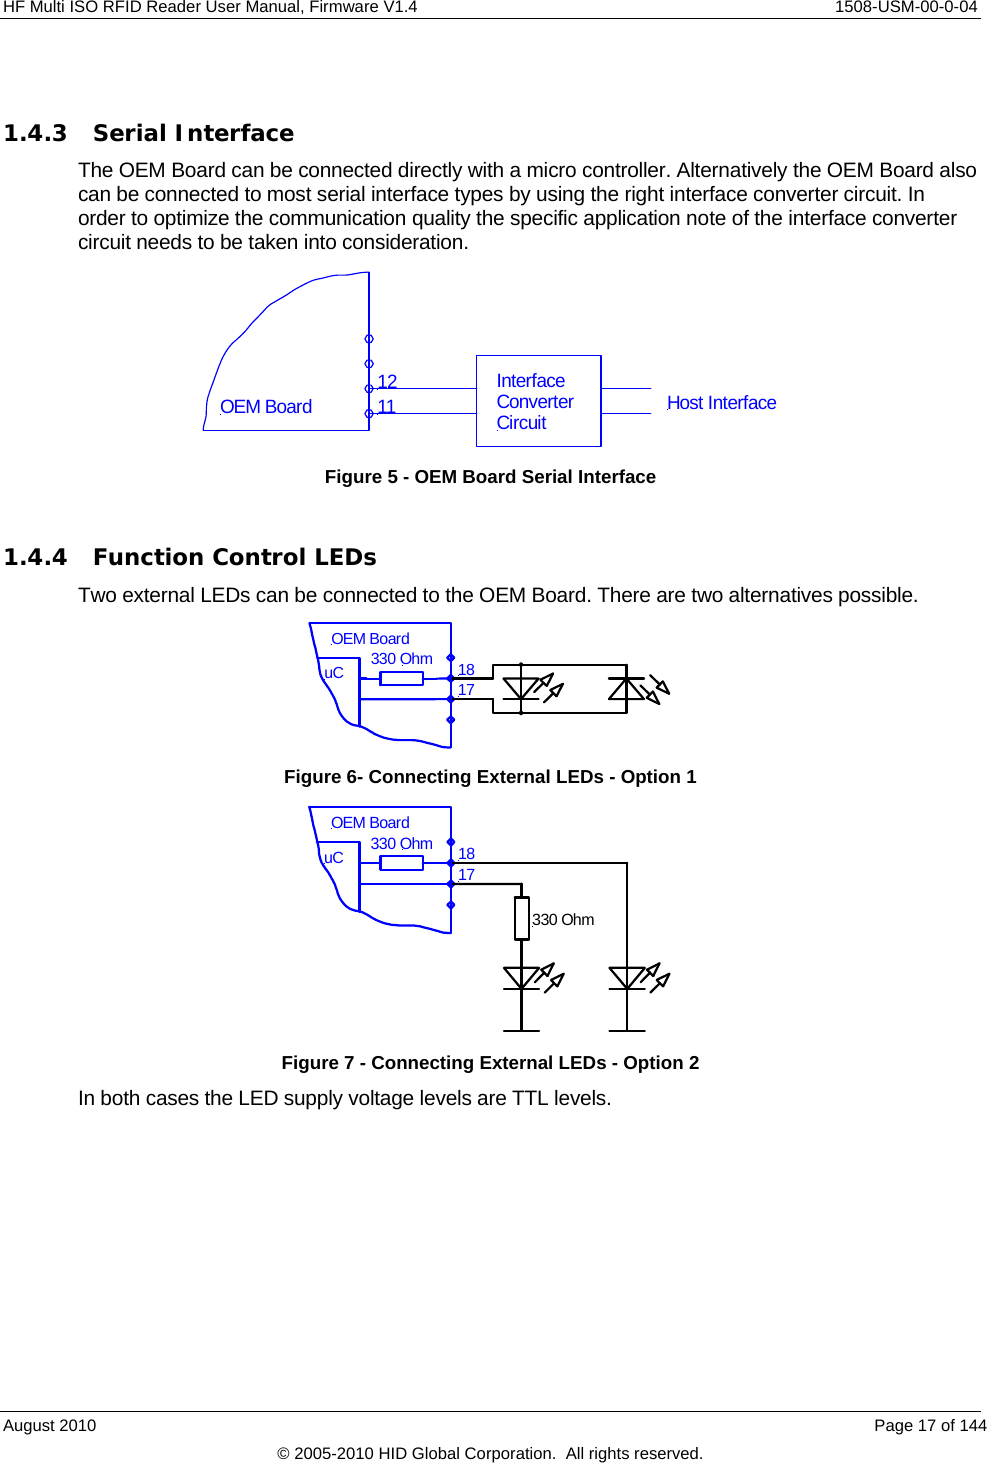  HF Multi ISO RFID Reader User Manual, Firmware V1.4    1508-USM-00-0-04  1.4.3 Serial Interface The OEM Board can be connected directly with a micro controller. Alternatively the OEM Board also can be connected to most serial interface types by using the right interface converter circuit. In order to optimize the communication quality the specific application note of the interface converter circuit needs to be taken into consideration. 1211InterfaceConverterCircuit Host InterfaceOEM Board Figure 5 - OEM Board Serial Interface  1.4.4 Function Control LEDs Two external LEDs can be connected to the OEM Board. There are two alternatives possible. uC 1817OEM Board330 Ohm Figure 6- Connecting External LEDs - Option 1 uC 1817330 OhmOEM Board330 Ohm Figure 7 - Connecting External LEDs - Option 2 In both cases the LED supply voltage levels are TTL levels. August 2010    Page 17 of 144 © 2005-2010 HID Global Corporation.  All rights reserved. 